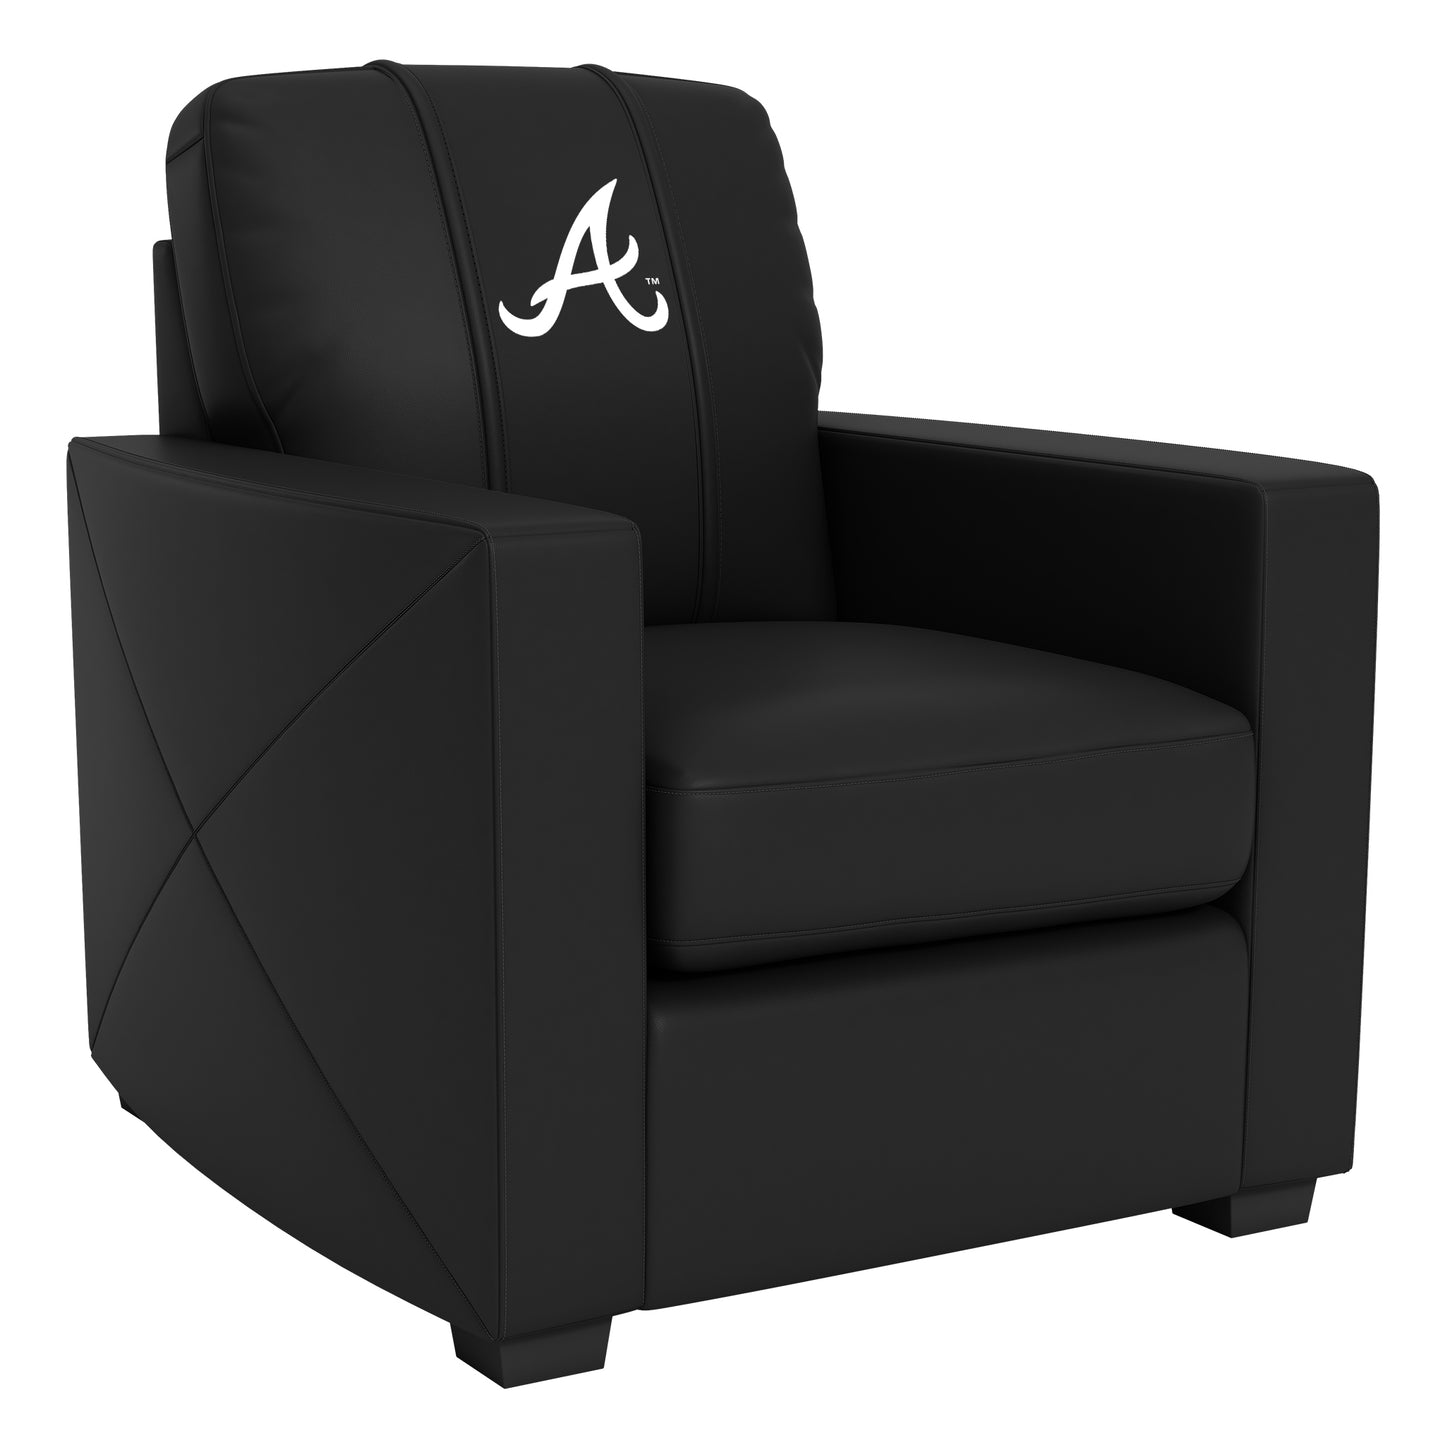 Silver Club Chair with Atlanta Braves Secondary